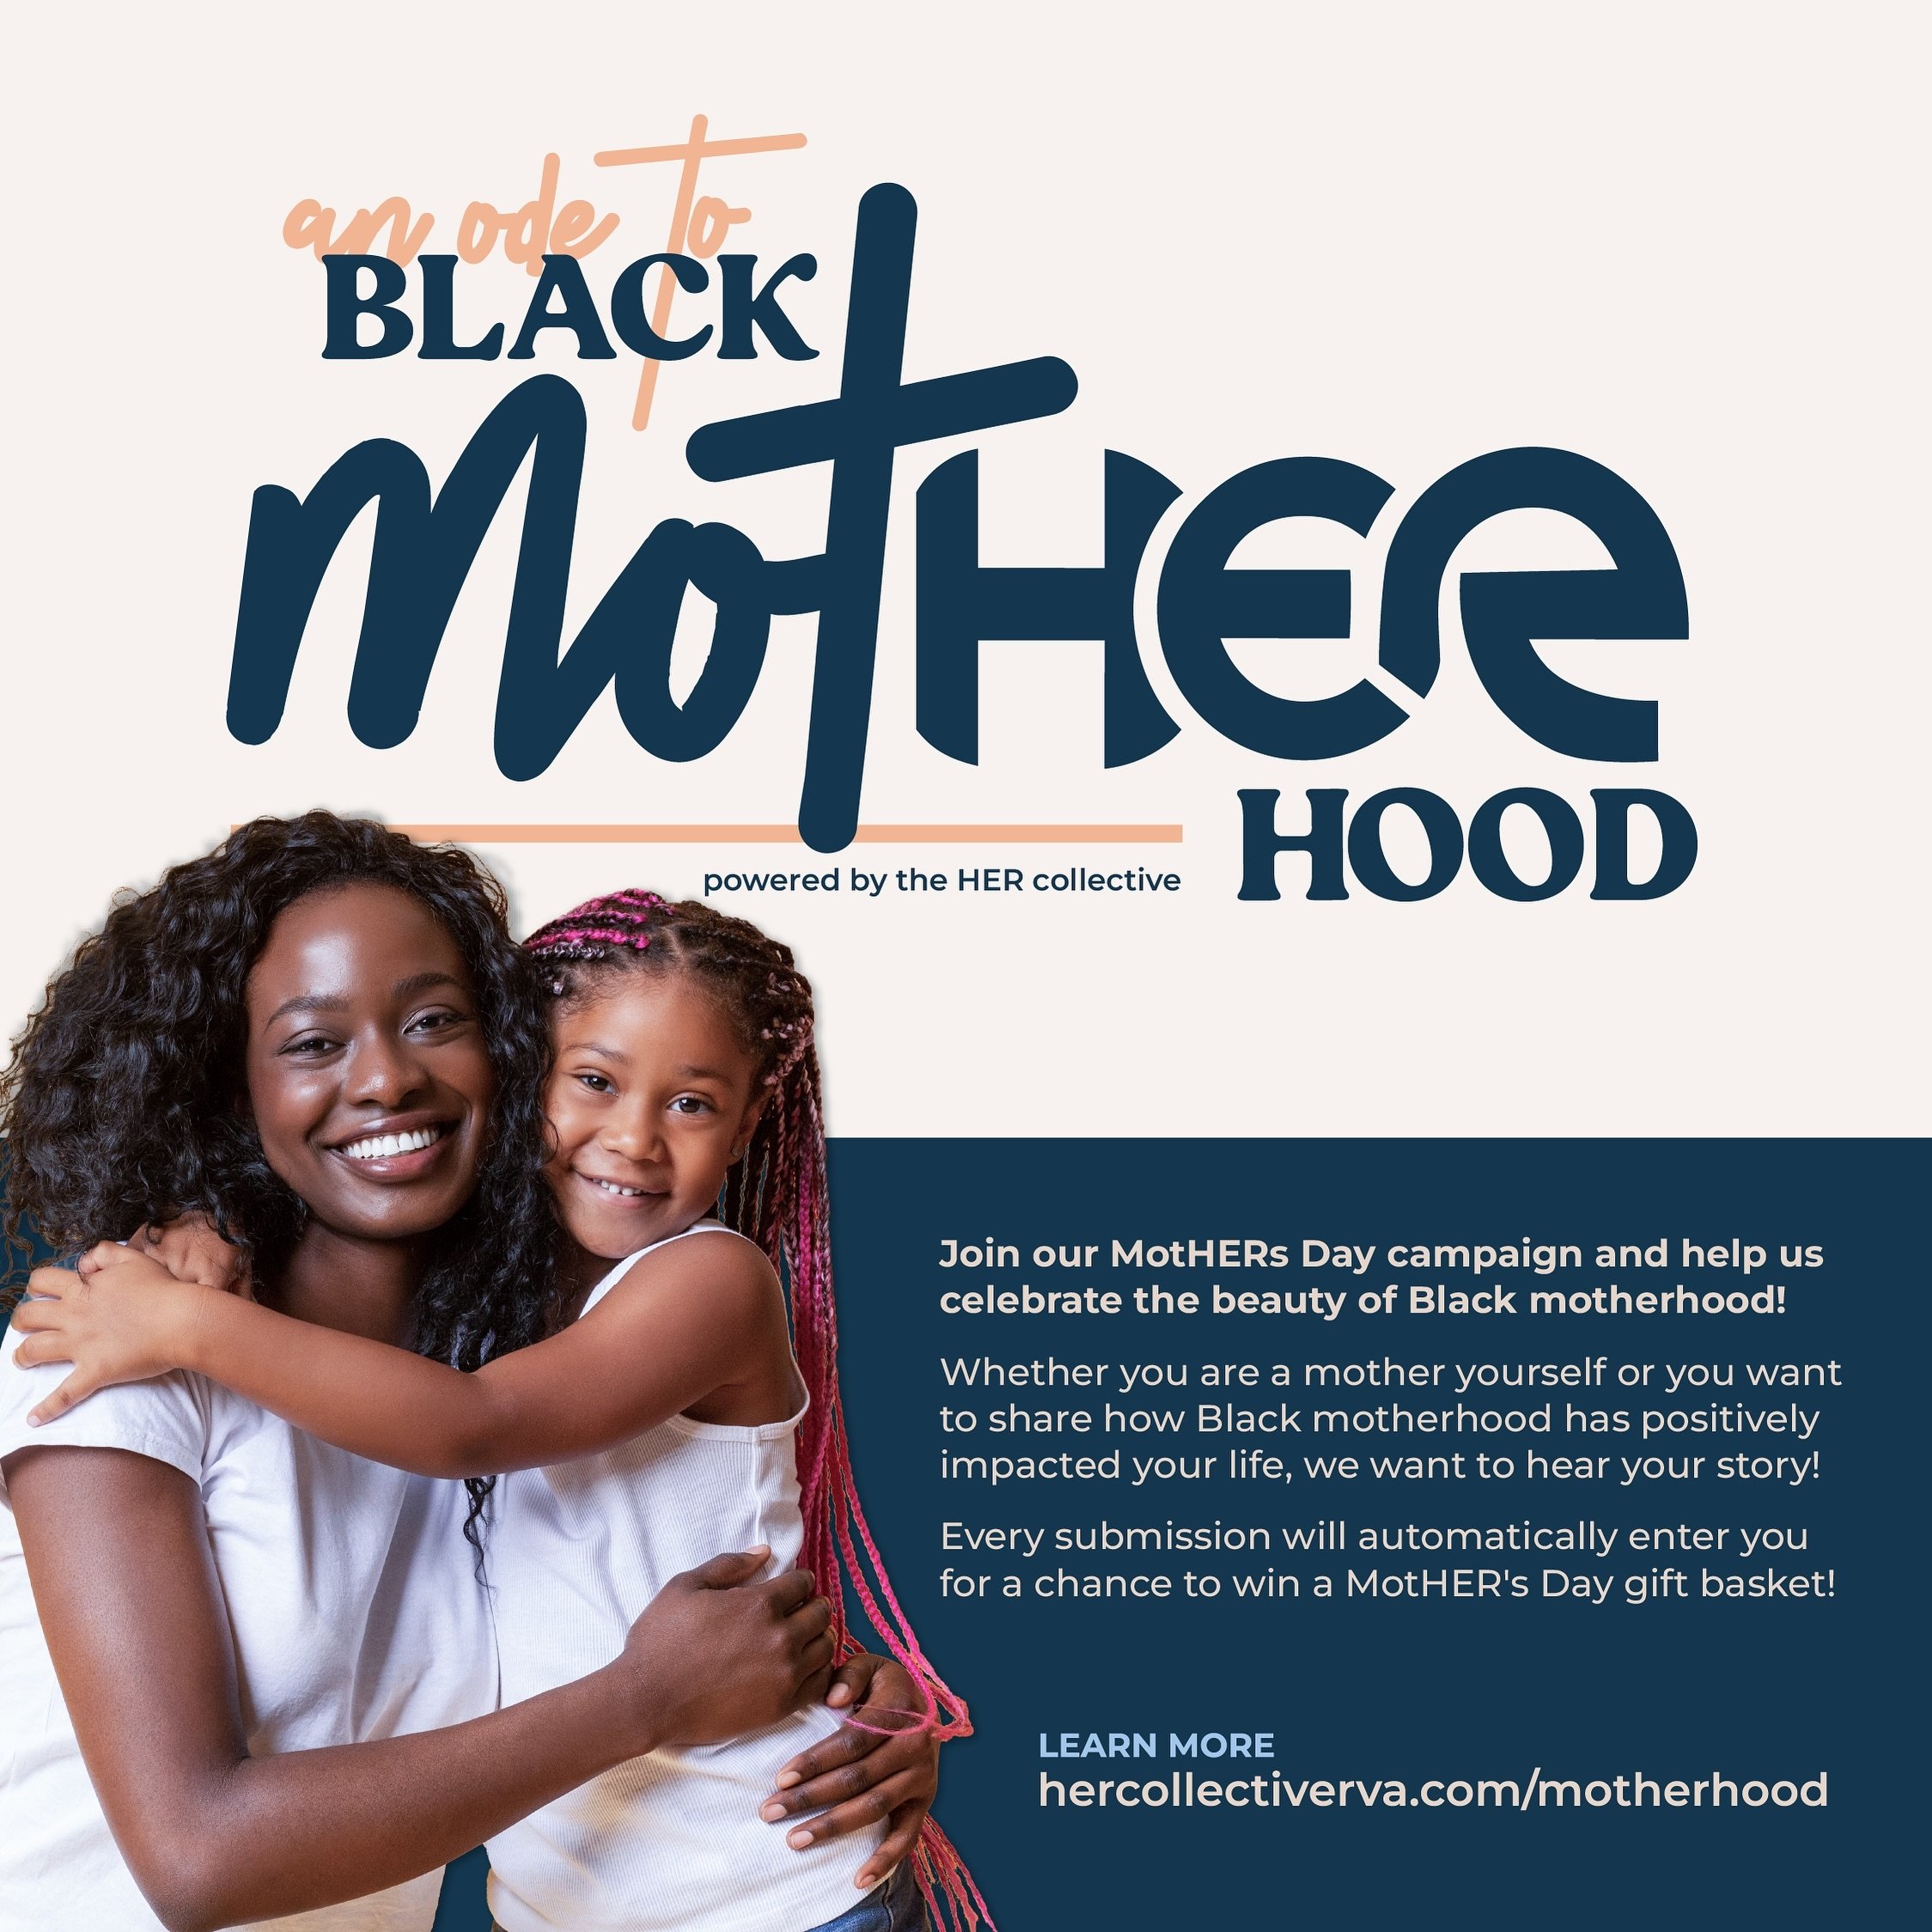 This Mother's Day, we're shining a spotlight on the incredible strength, resilience, and love of Black motHERs everywhere. 💙

We invite you to be part of our special digital campaign, where we'll be sharing stories, experiences, and reflections that